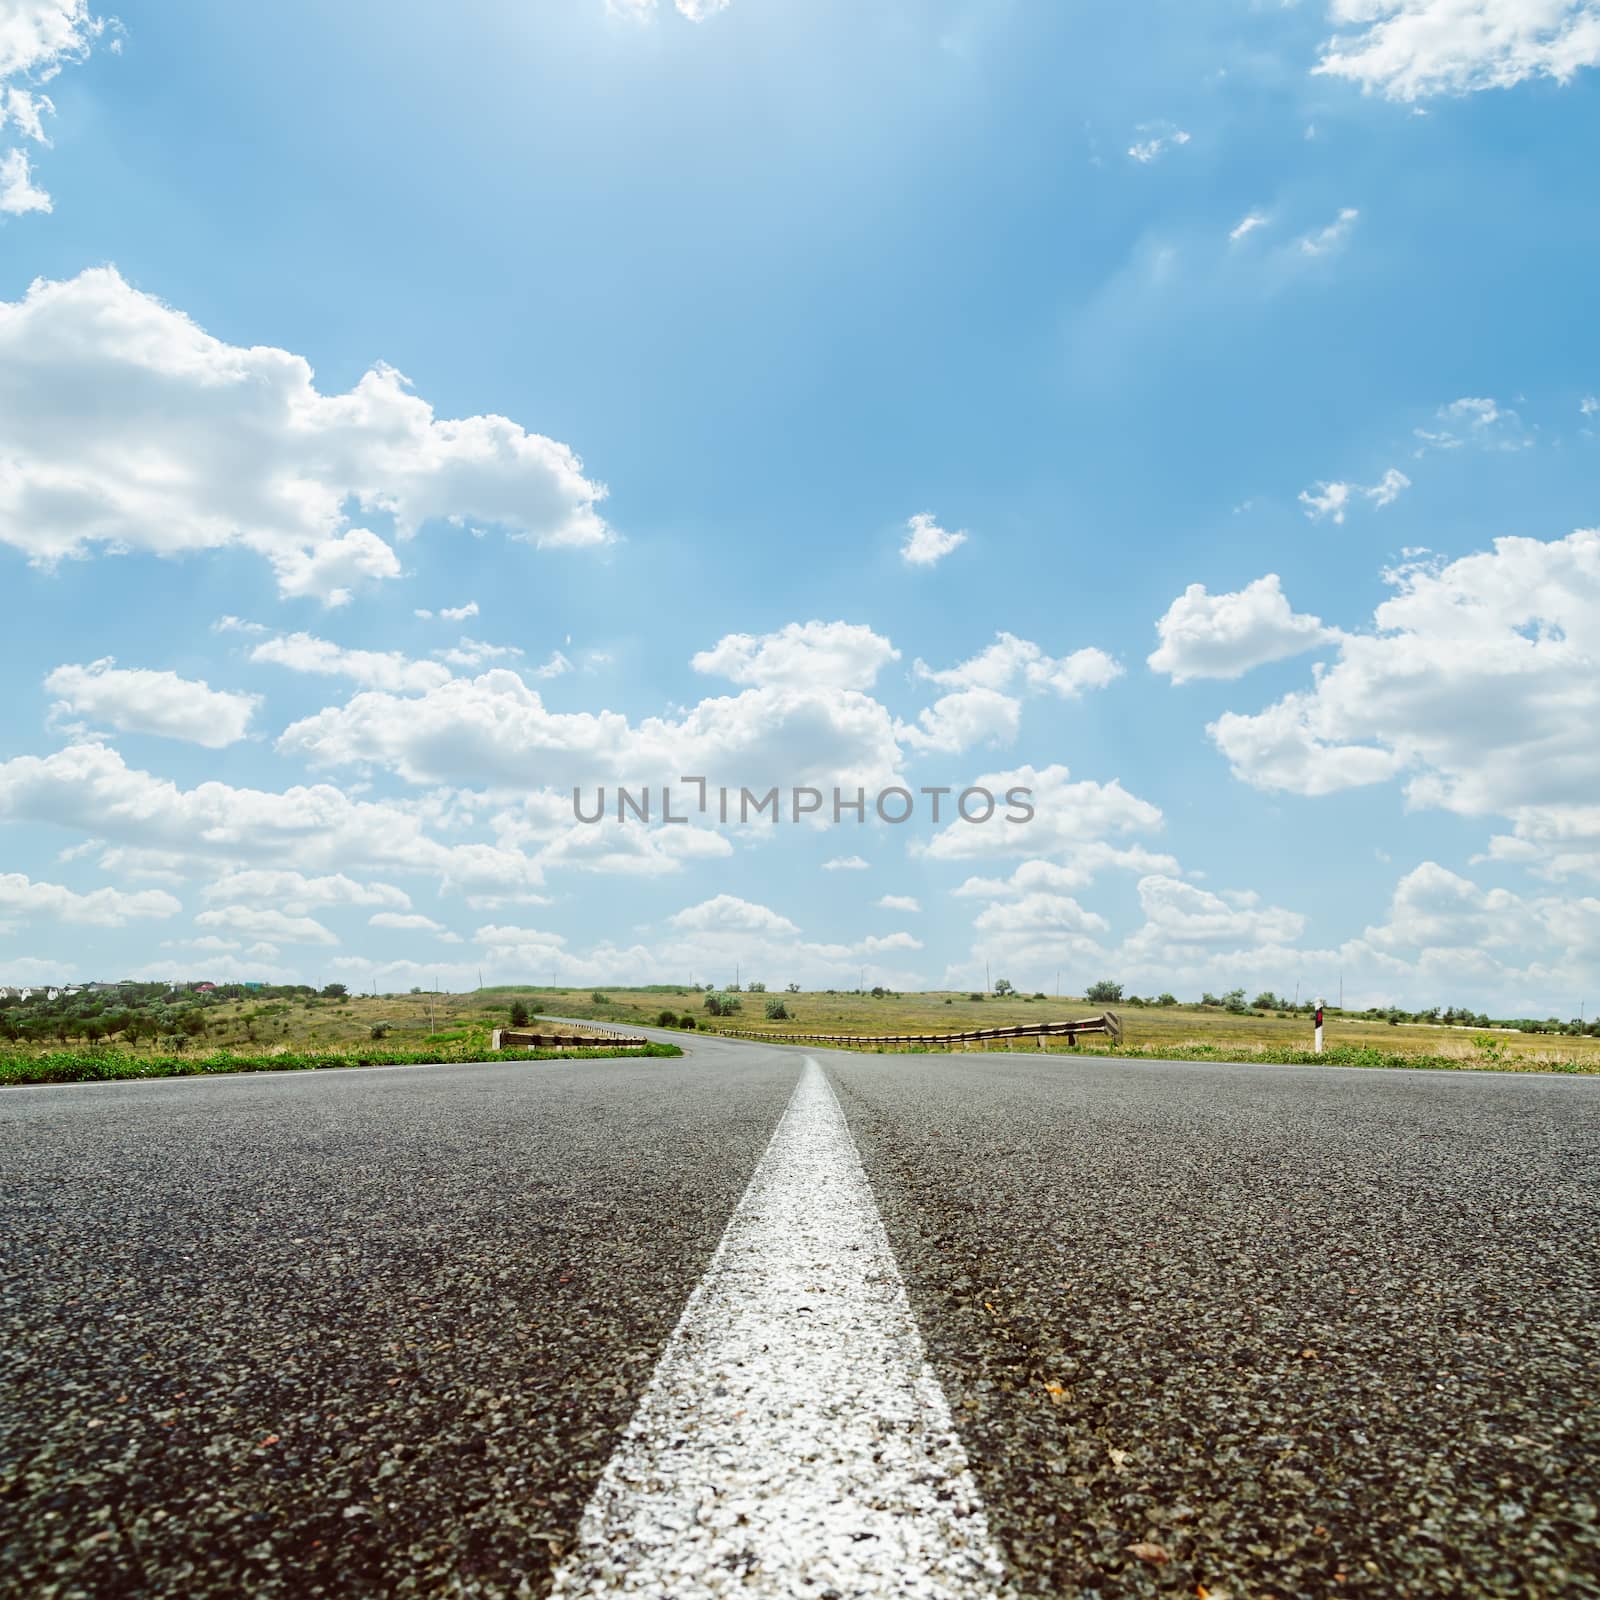 white line on asphalt road under sky with sun and clouds